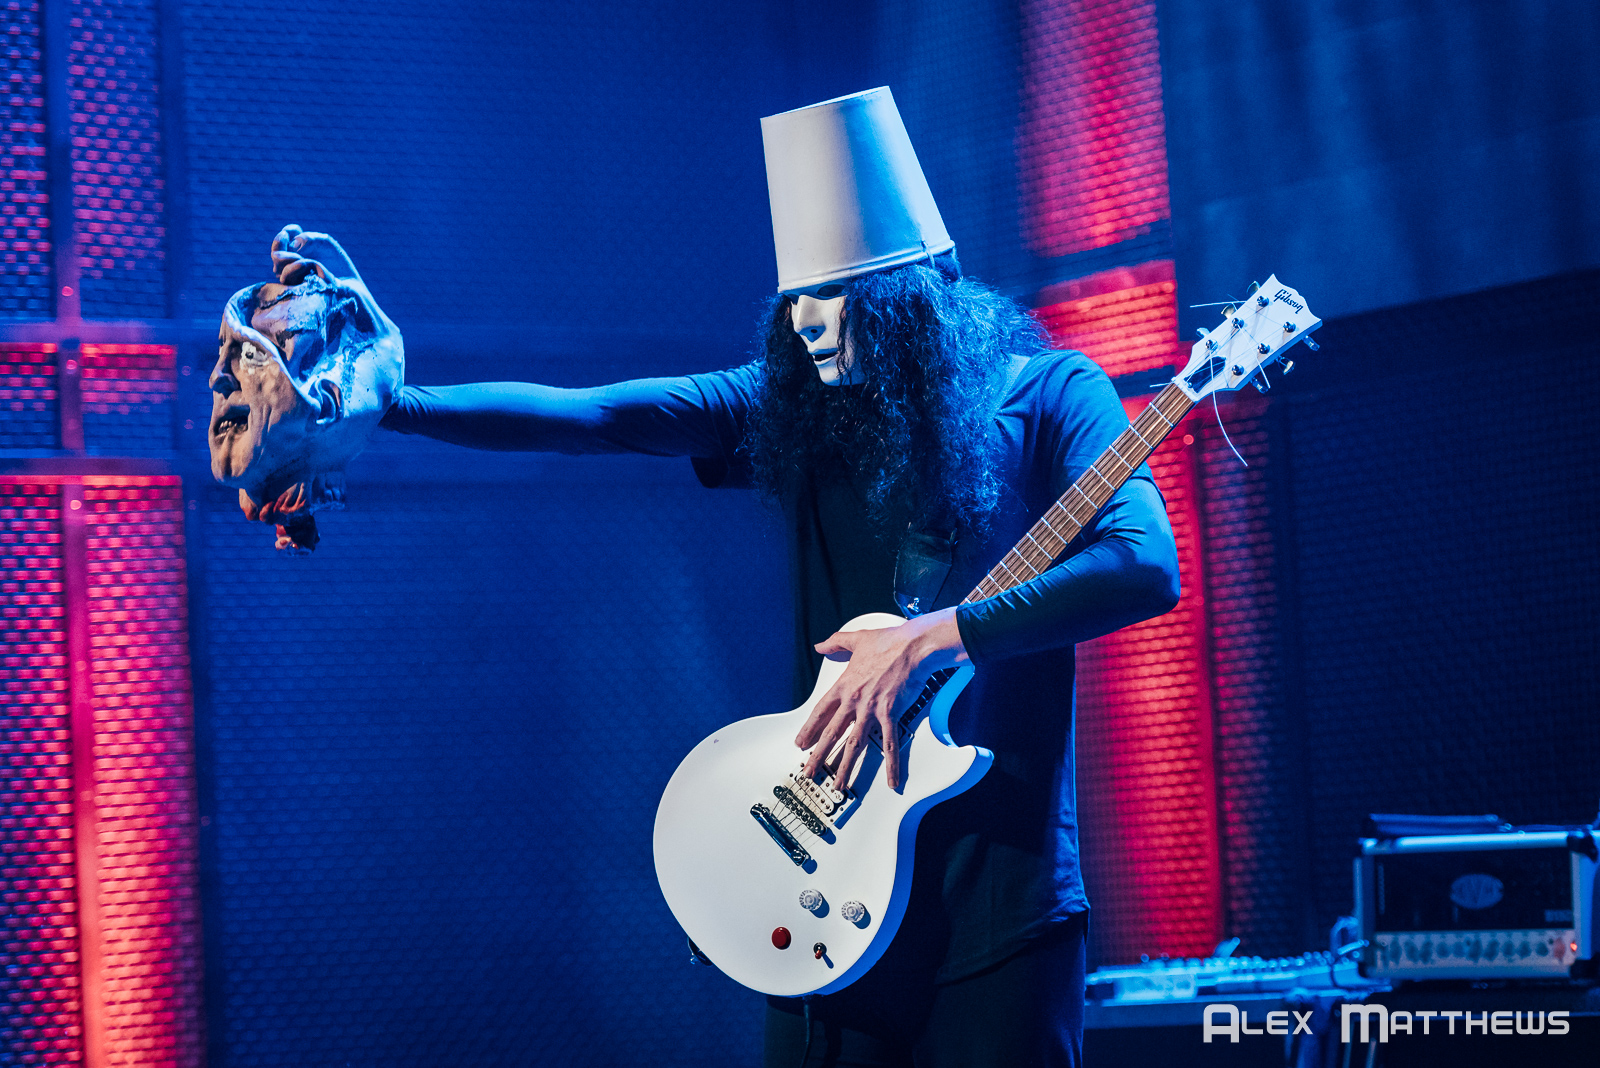 Buckethead wallpapers, Music, HQ Buckethead pictures 4K Wallpapers 2019